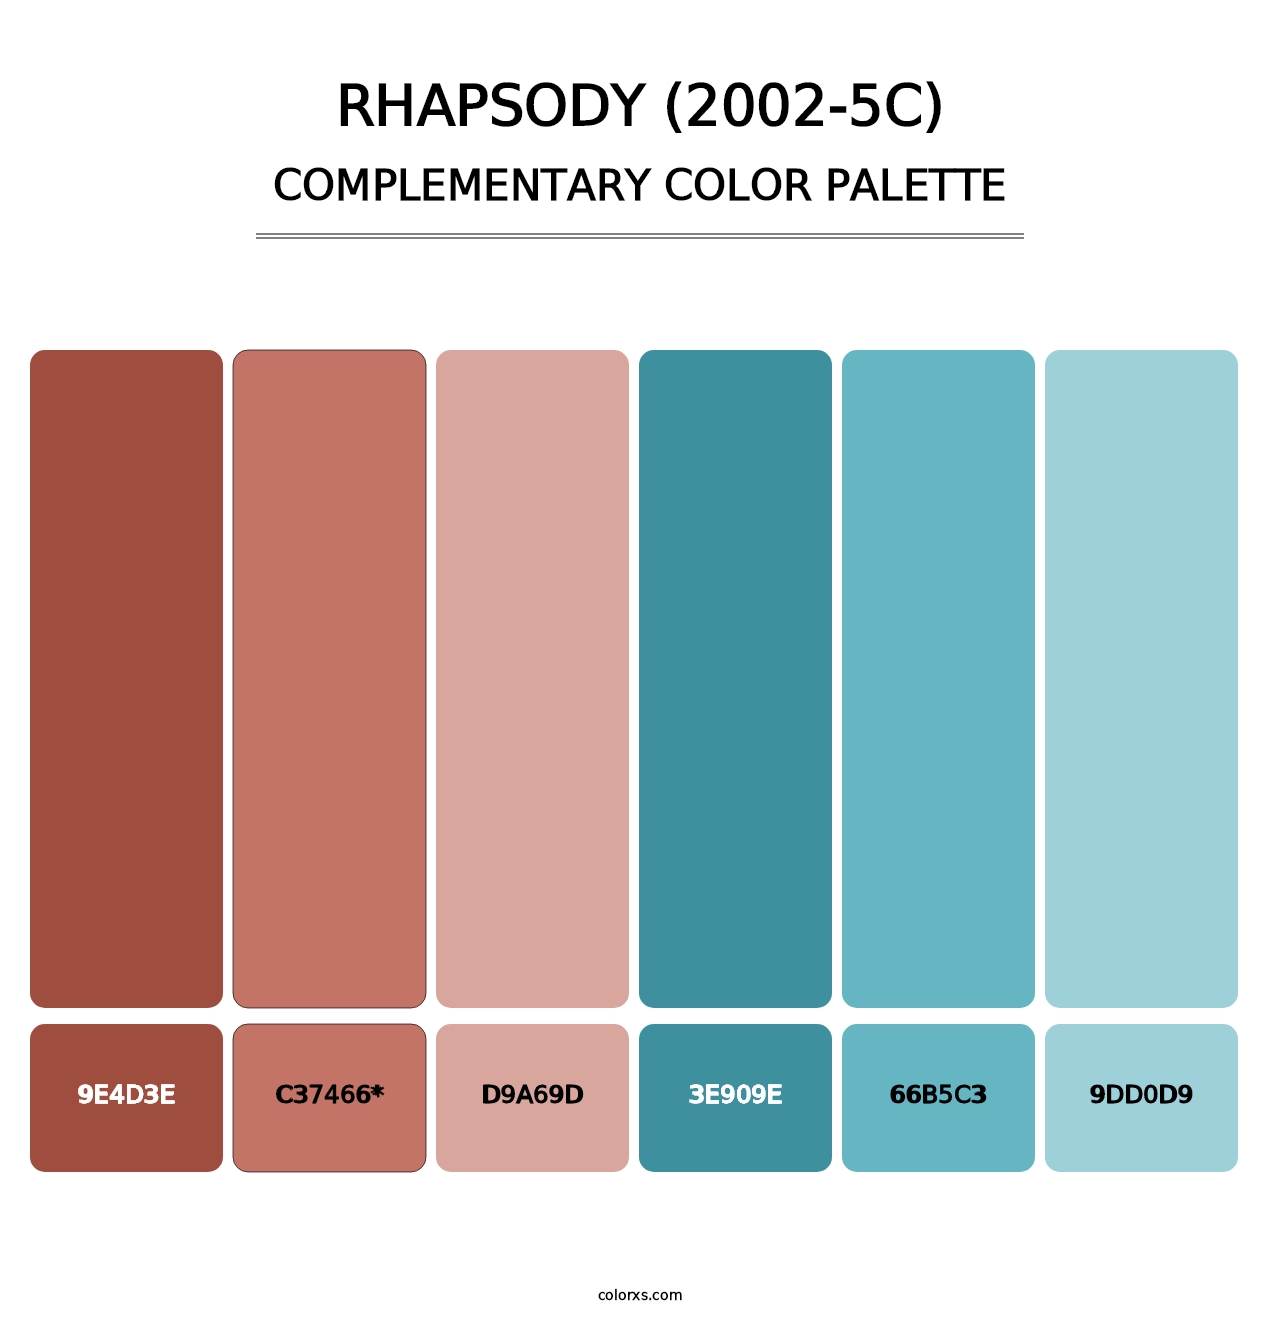 Rhapsody (2002-5C) - Complementary Color Palette